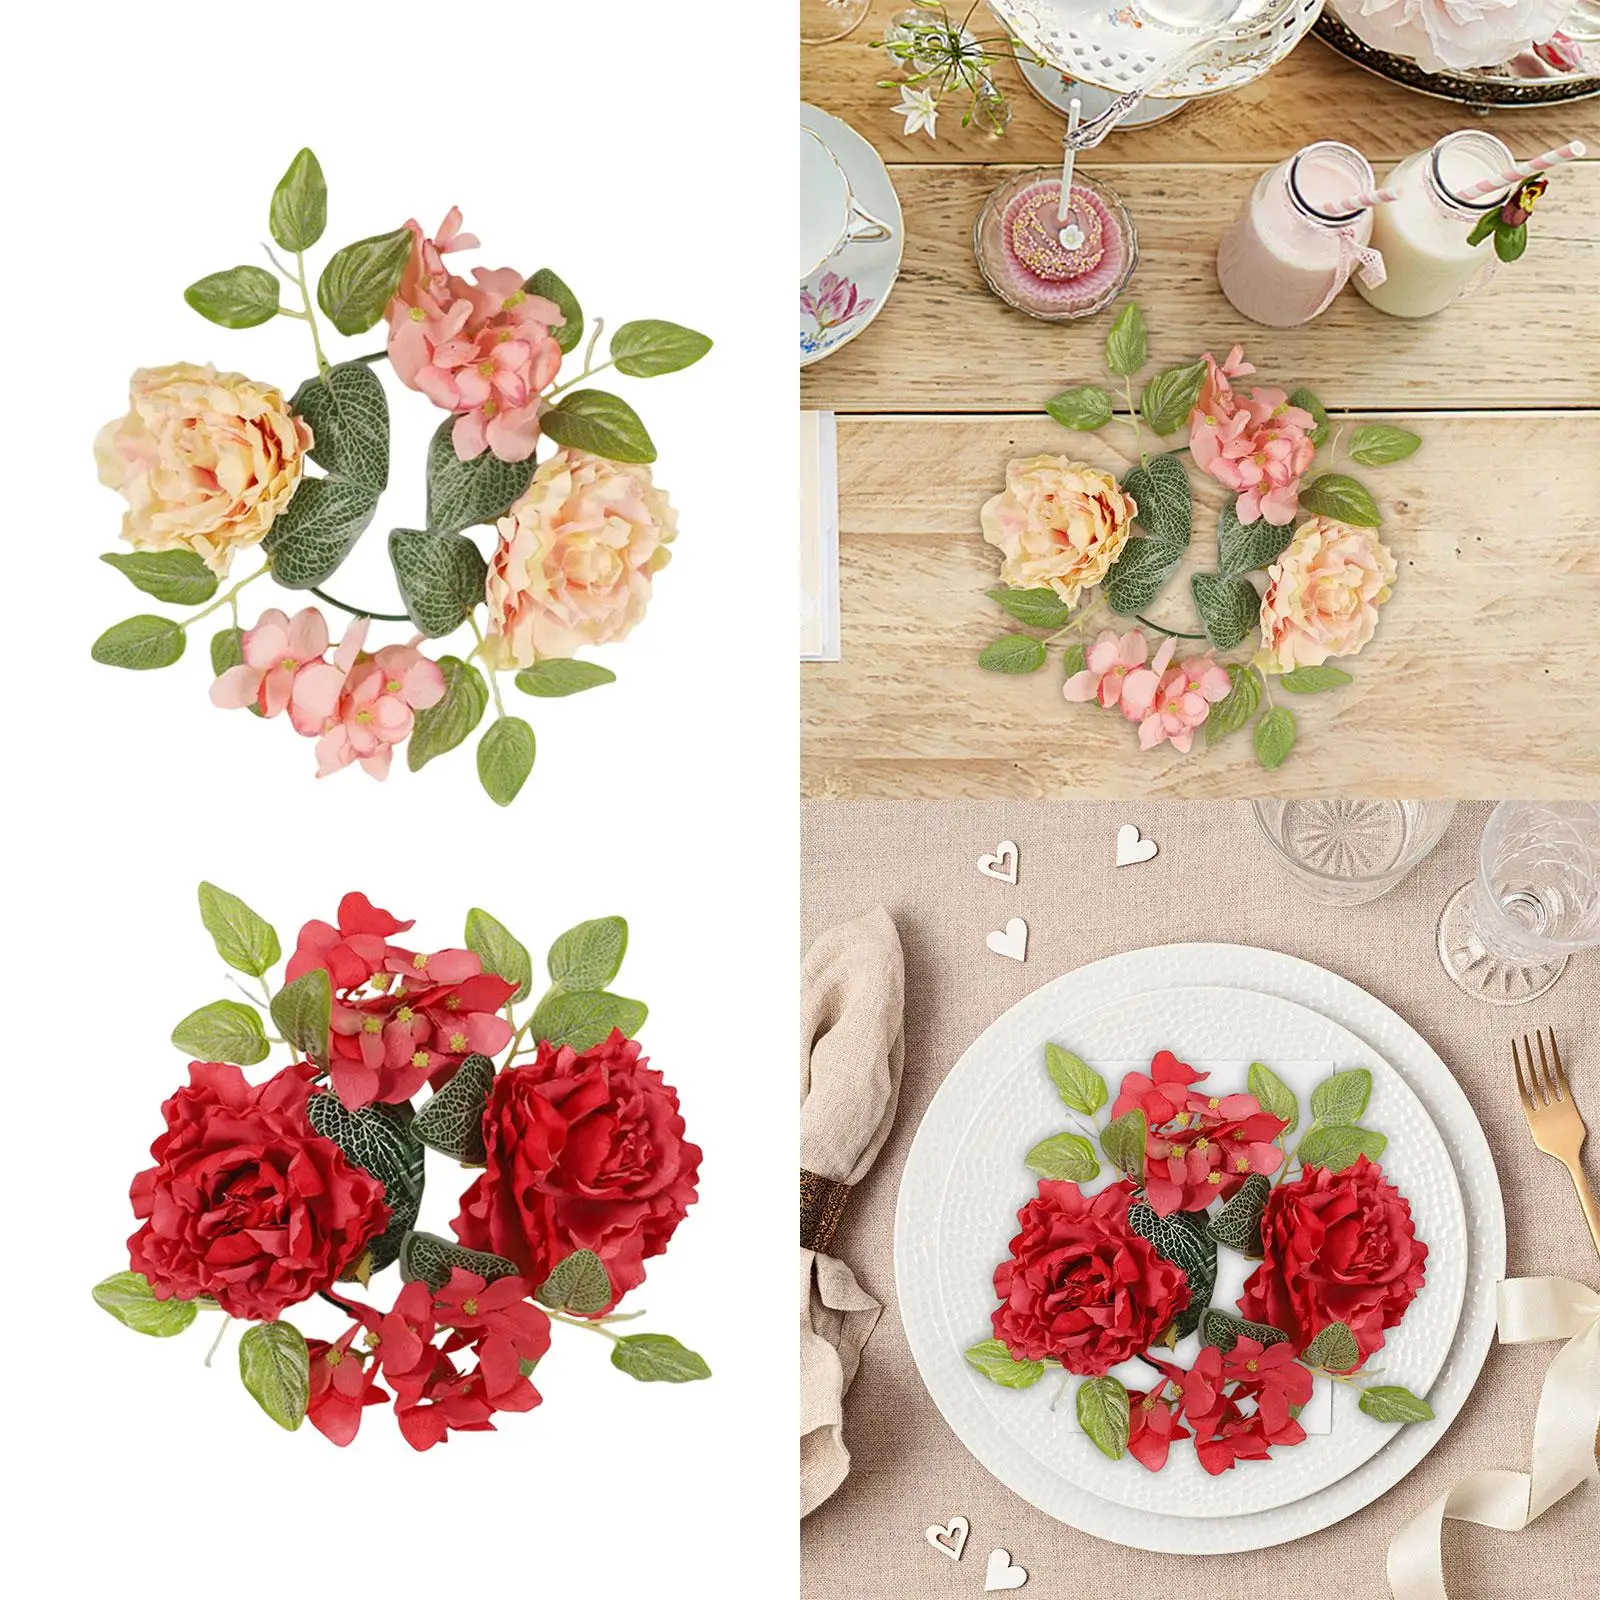 Artificial Candle Rings Wreaths Flower Garland Peony Wreath Decoration Candle Rings for Door Party Tabletop Farmhouse Ornaments